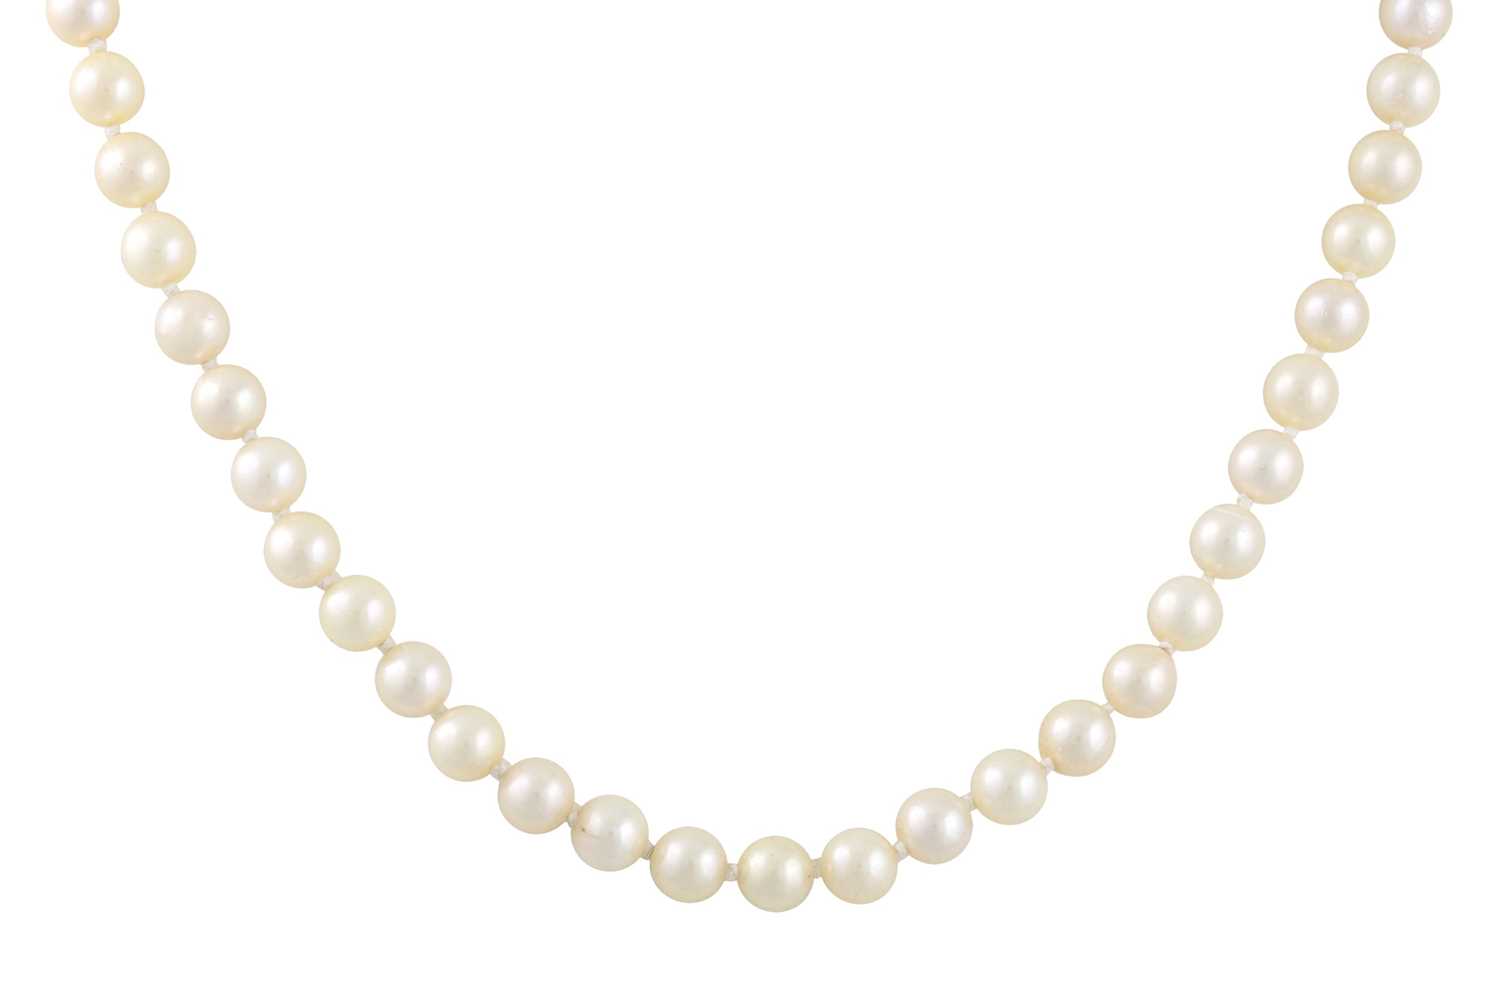 Lot 62 - A CULTURED PEARL NECKLACE, gold clasp